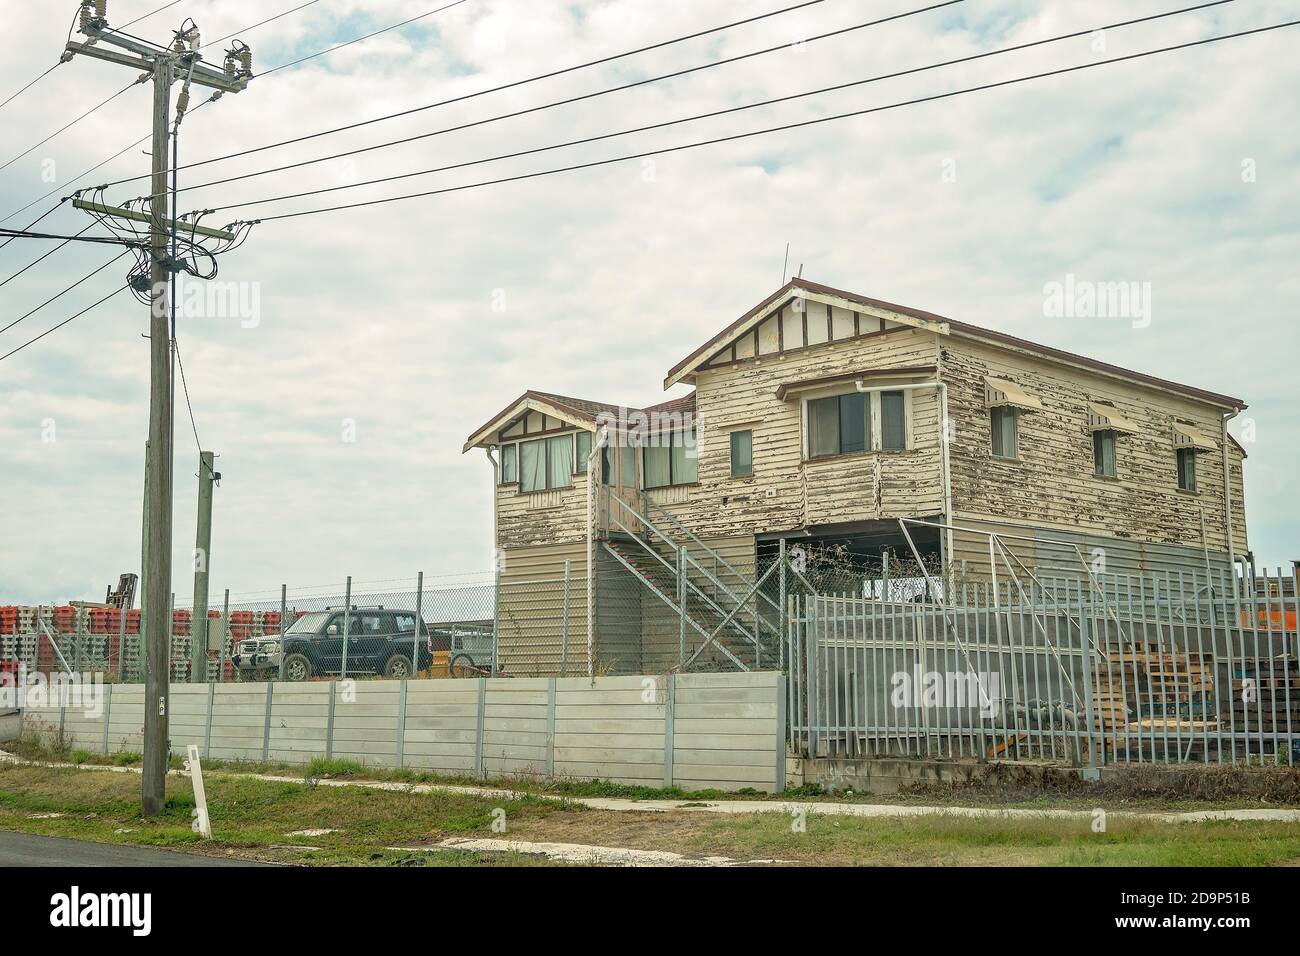 Brisbane, Queensland, Australia - 26th September 2019: An old dilapidated vacant high blocked house in an industrial area of the city Stock Photo